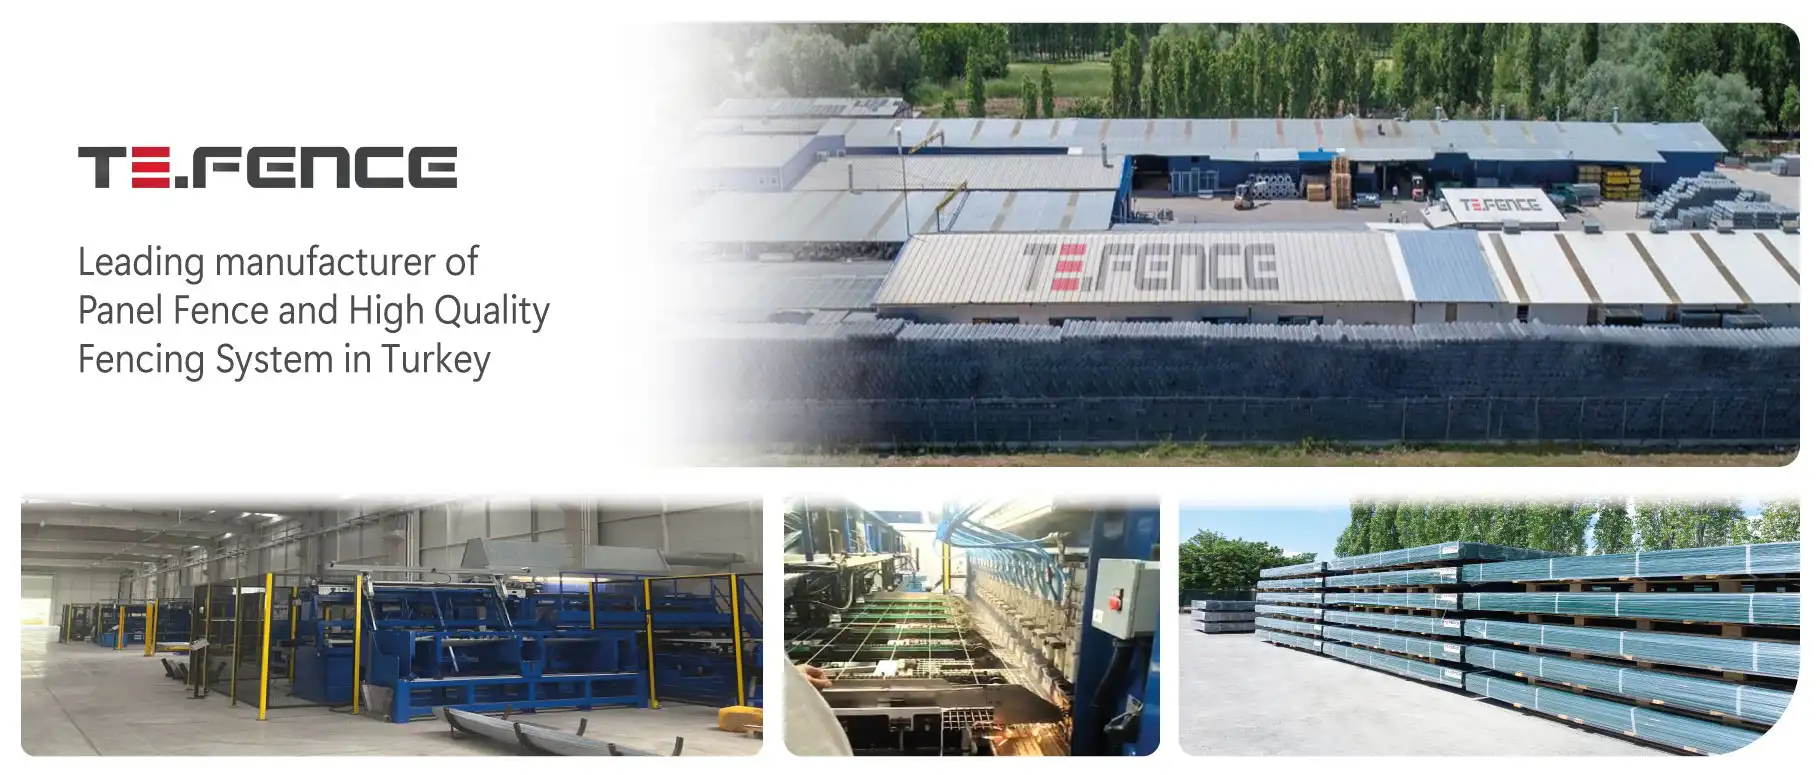 Leading manufacturer of High Quality Fencing System in Turkey